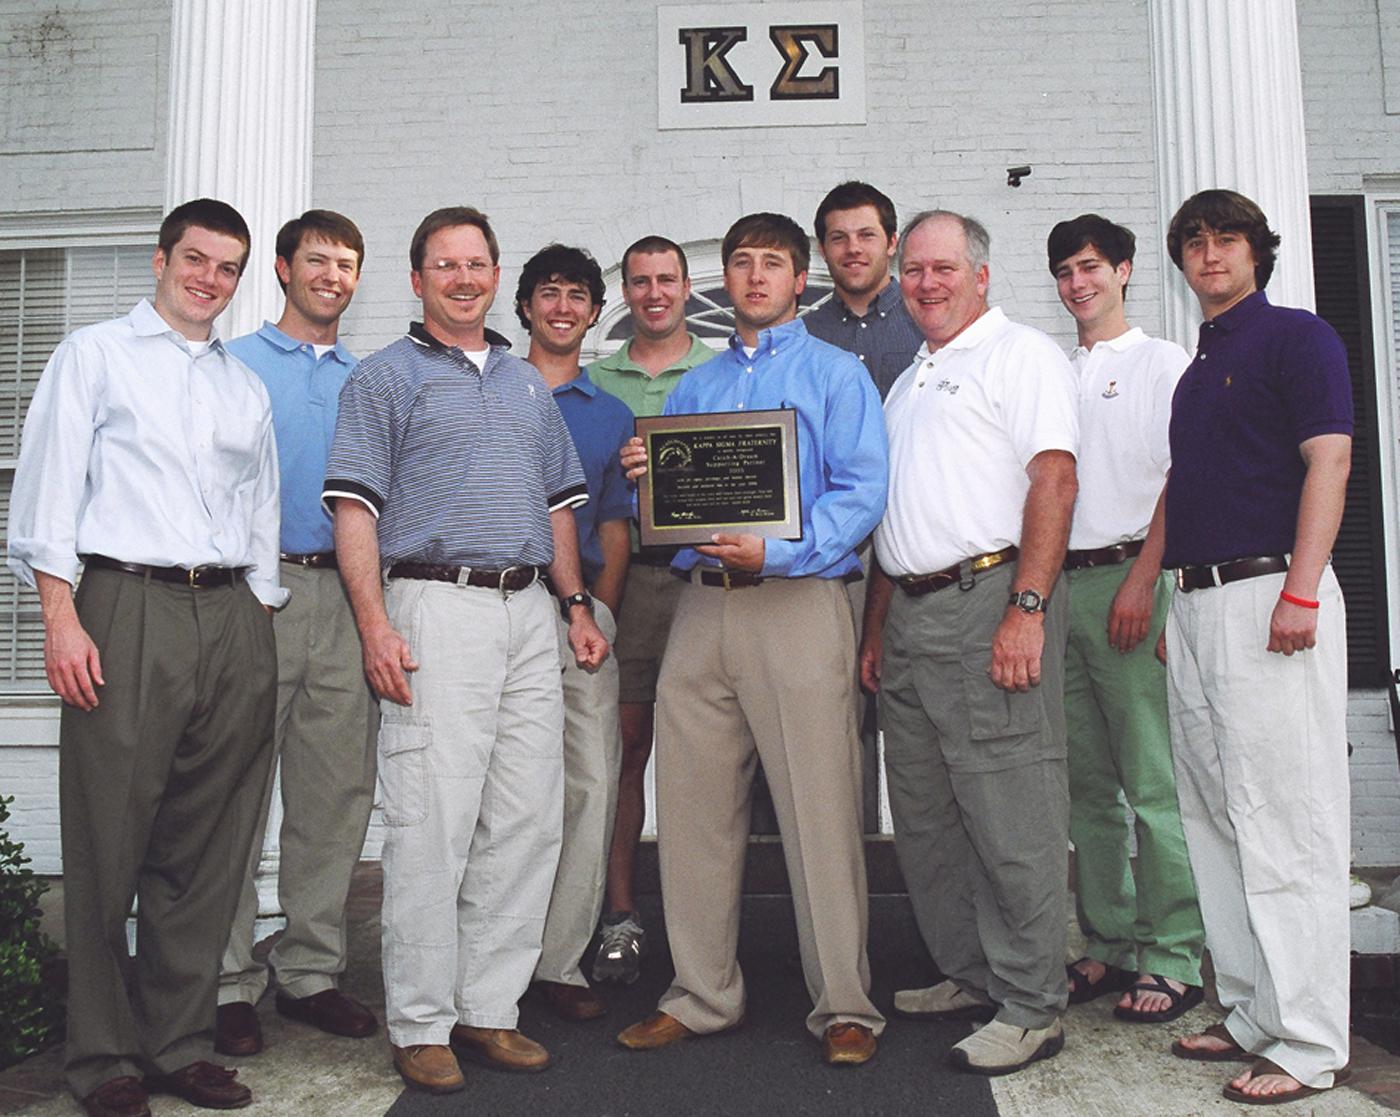 MSU's Kappa Sigma fraternity raised $20,000 for the national Catch-A-Dream Foundation this year through their annual Charity Classic football game against the members of Sigma Chi. Kappa Sigma leadership is pictured here with the plaque they received to commemorate their donation. Pictured from left are: (front row) Newton Wiggins, Darrell Daigre from Mossy Oak, Jim Hunter Walsh, Marty Brunson from Catch-A-Dream, and Phillip Bass; (back row) alumni advisor Kevin Randall, Henry Minor, Hunt Gilliland, Luke Ui